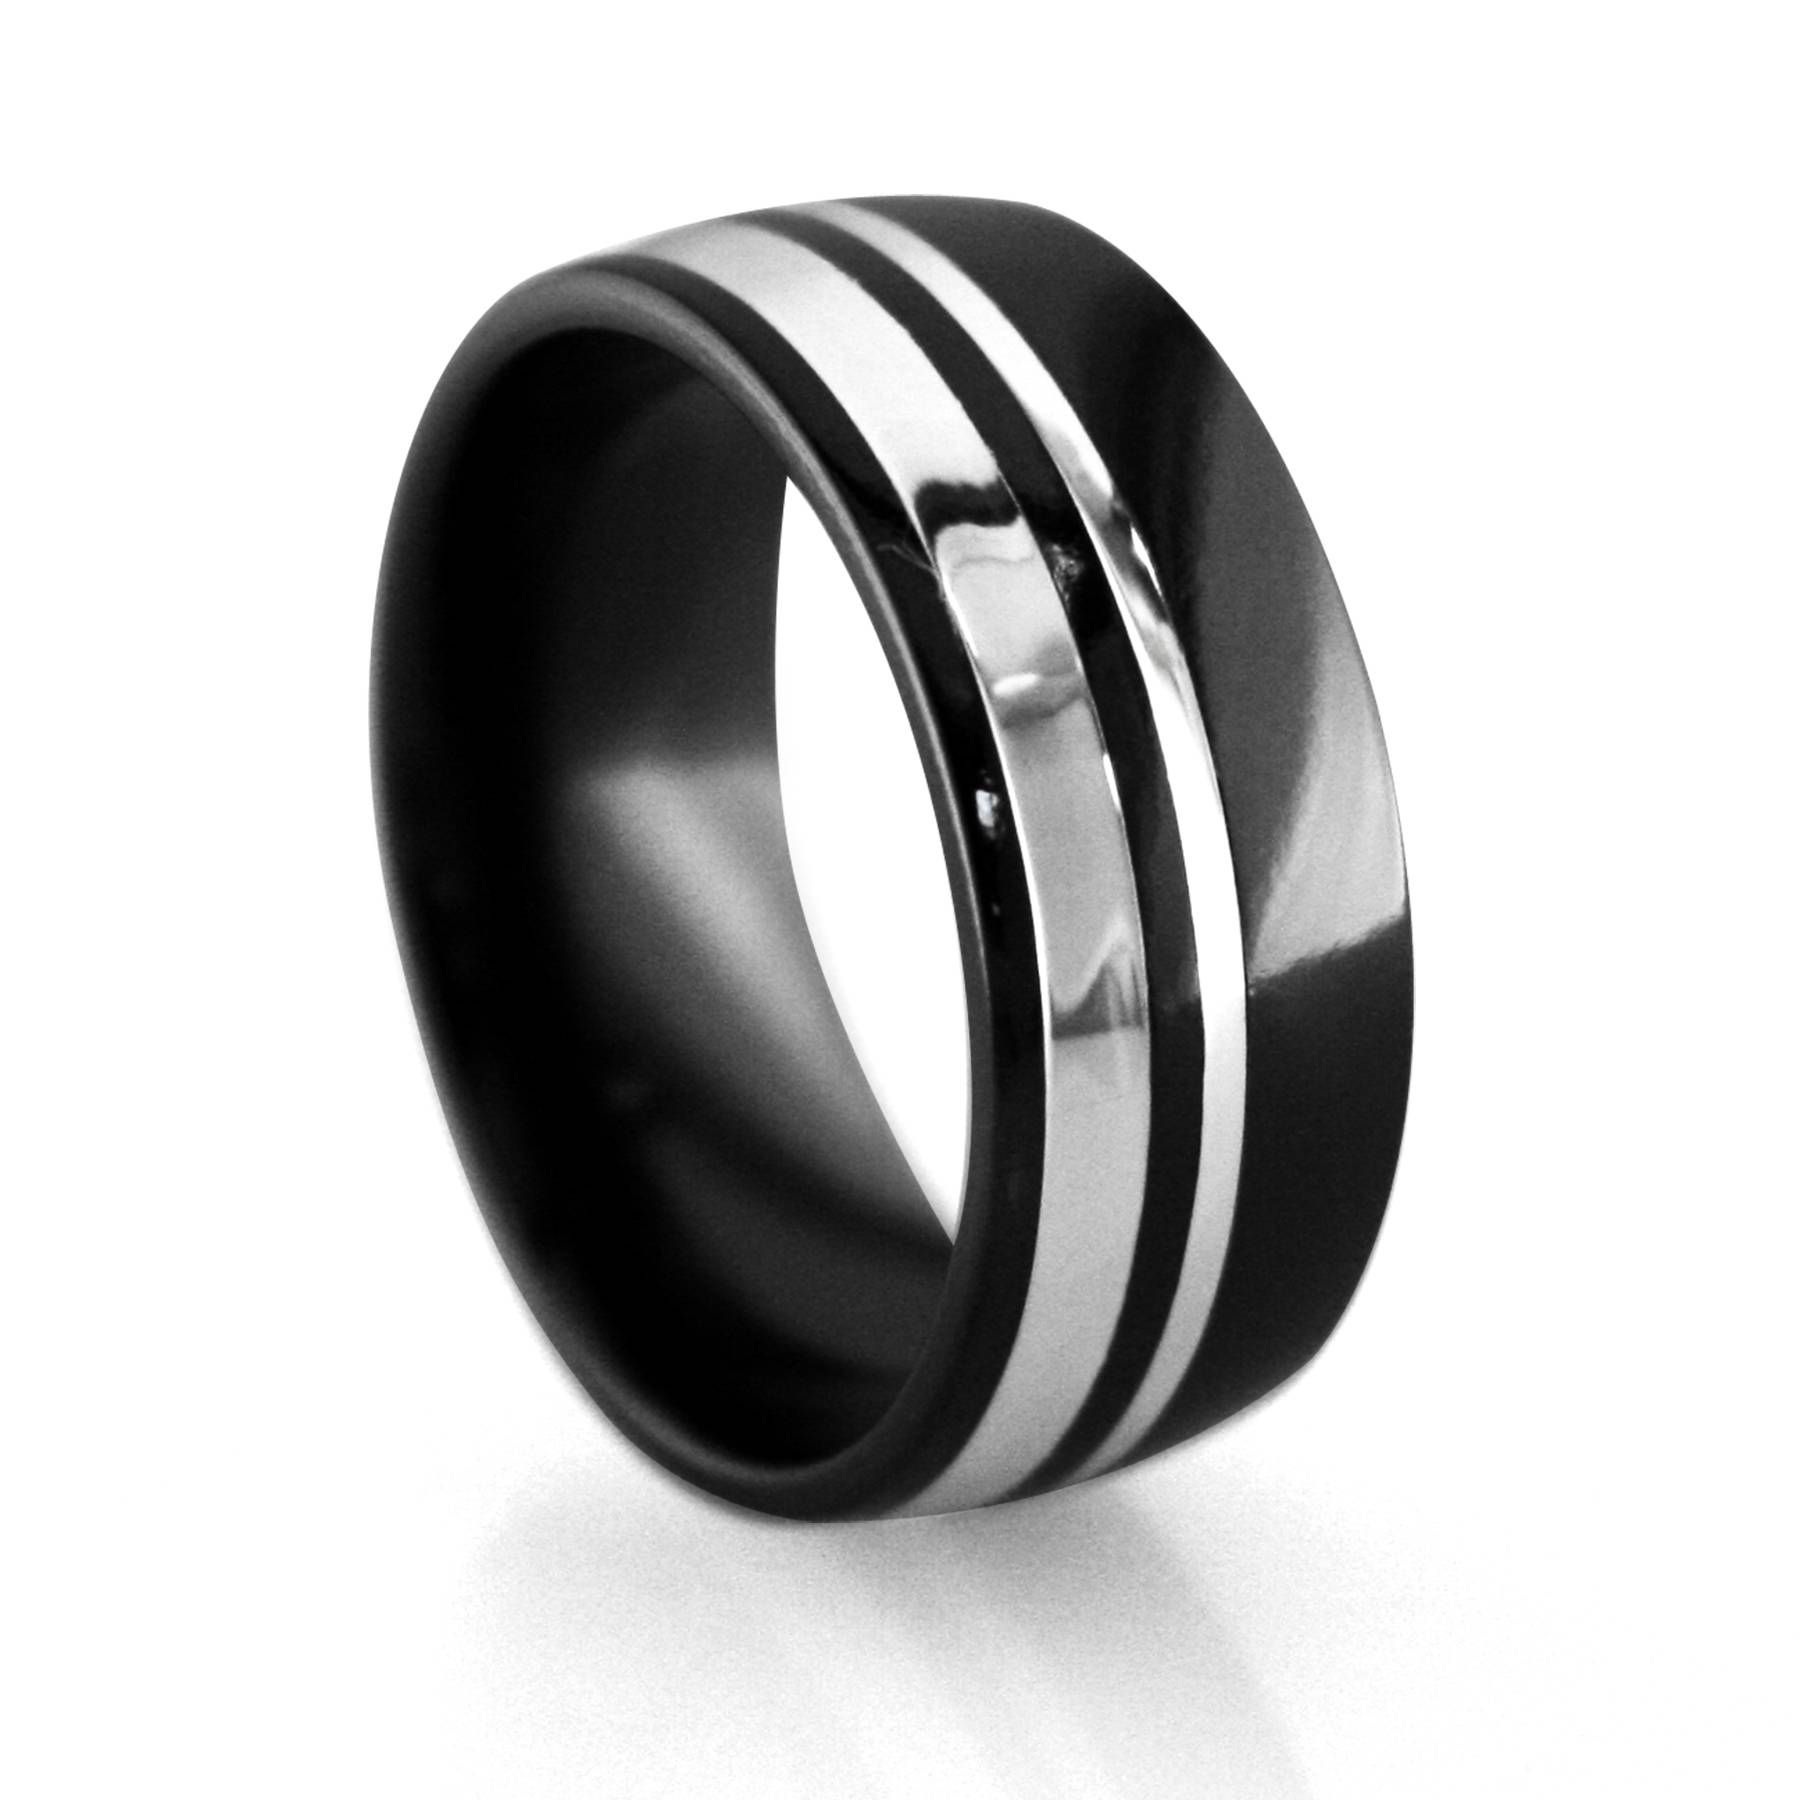 Dark Metal Mens Wedding Bands Tags : Tungsten Wedding Ring Buying With Regard To Dark Metal Mens Wedding Bands (View 11 of 15)